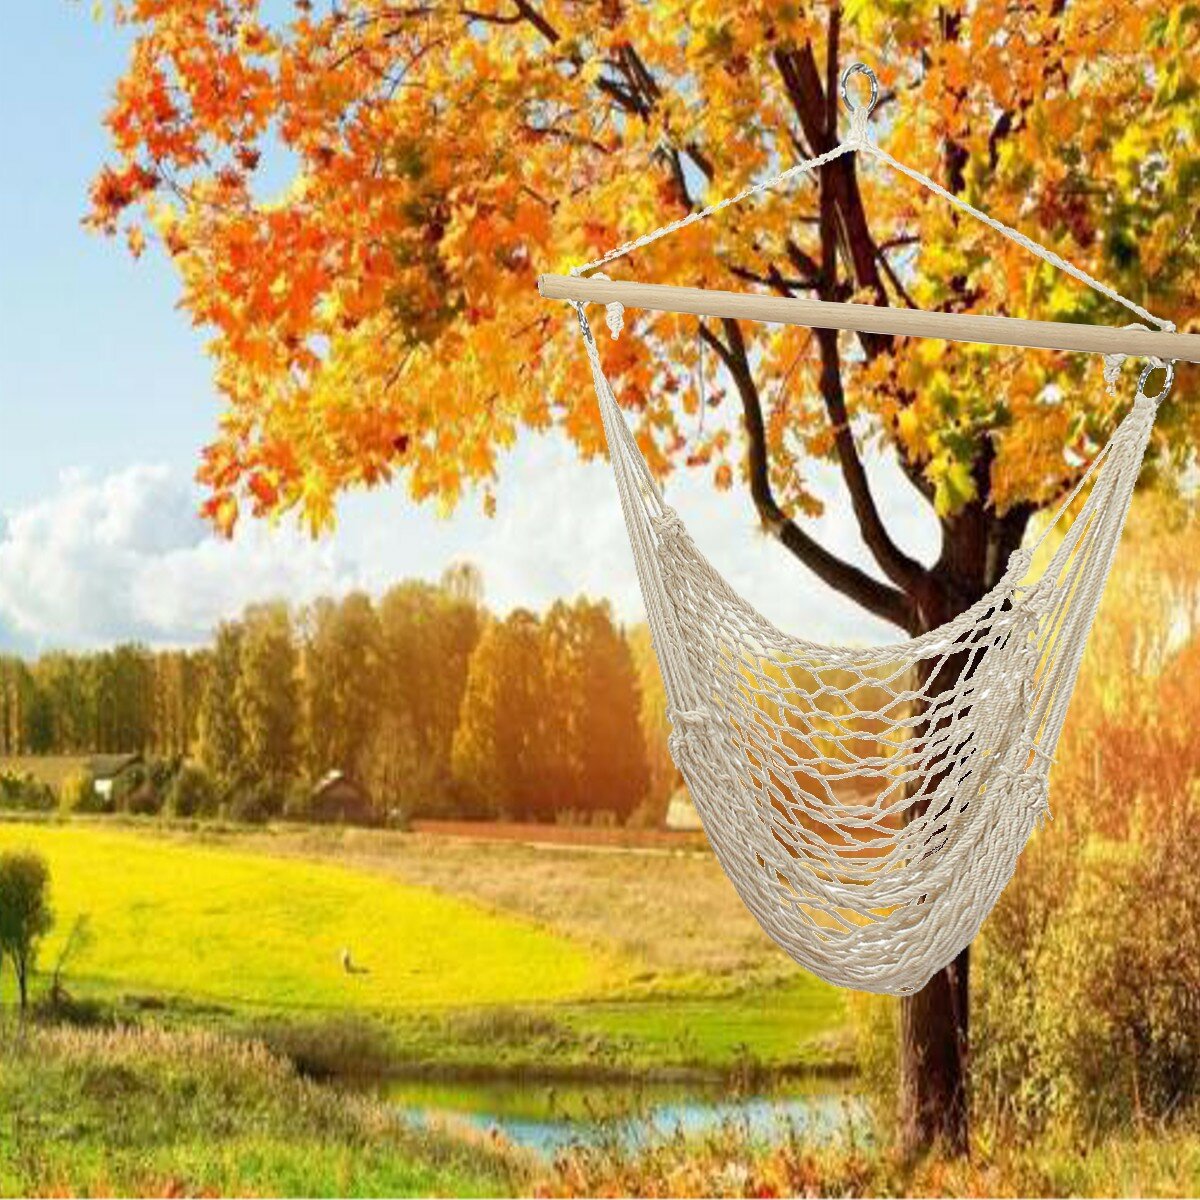 135 x 90CM Portable Outdoor Swing Cotton Hammock Chair Wooden Bar Hanging Rope Chair For Garden Patio Yard Porch